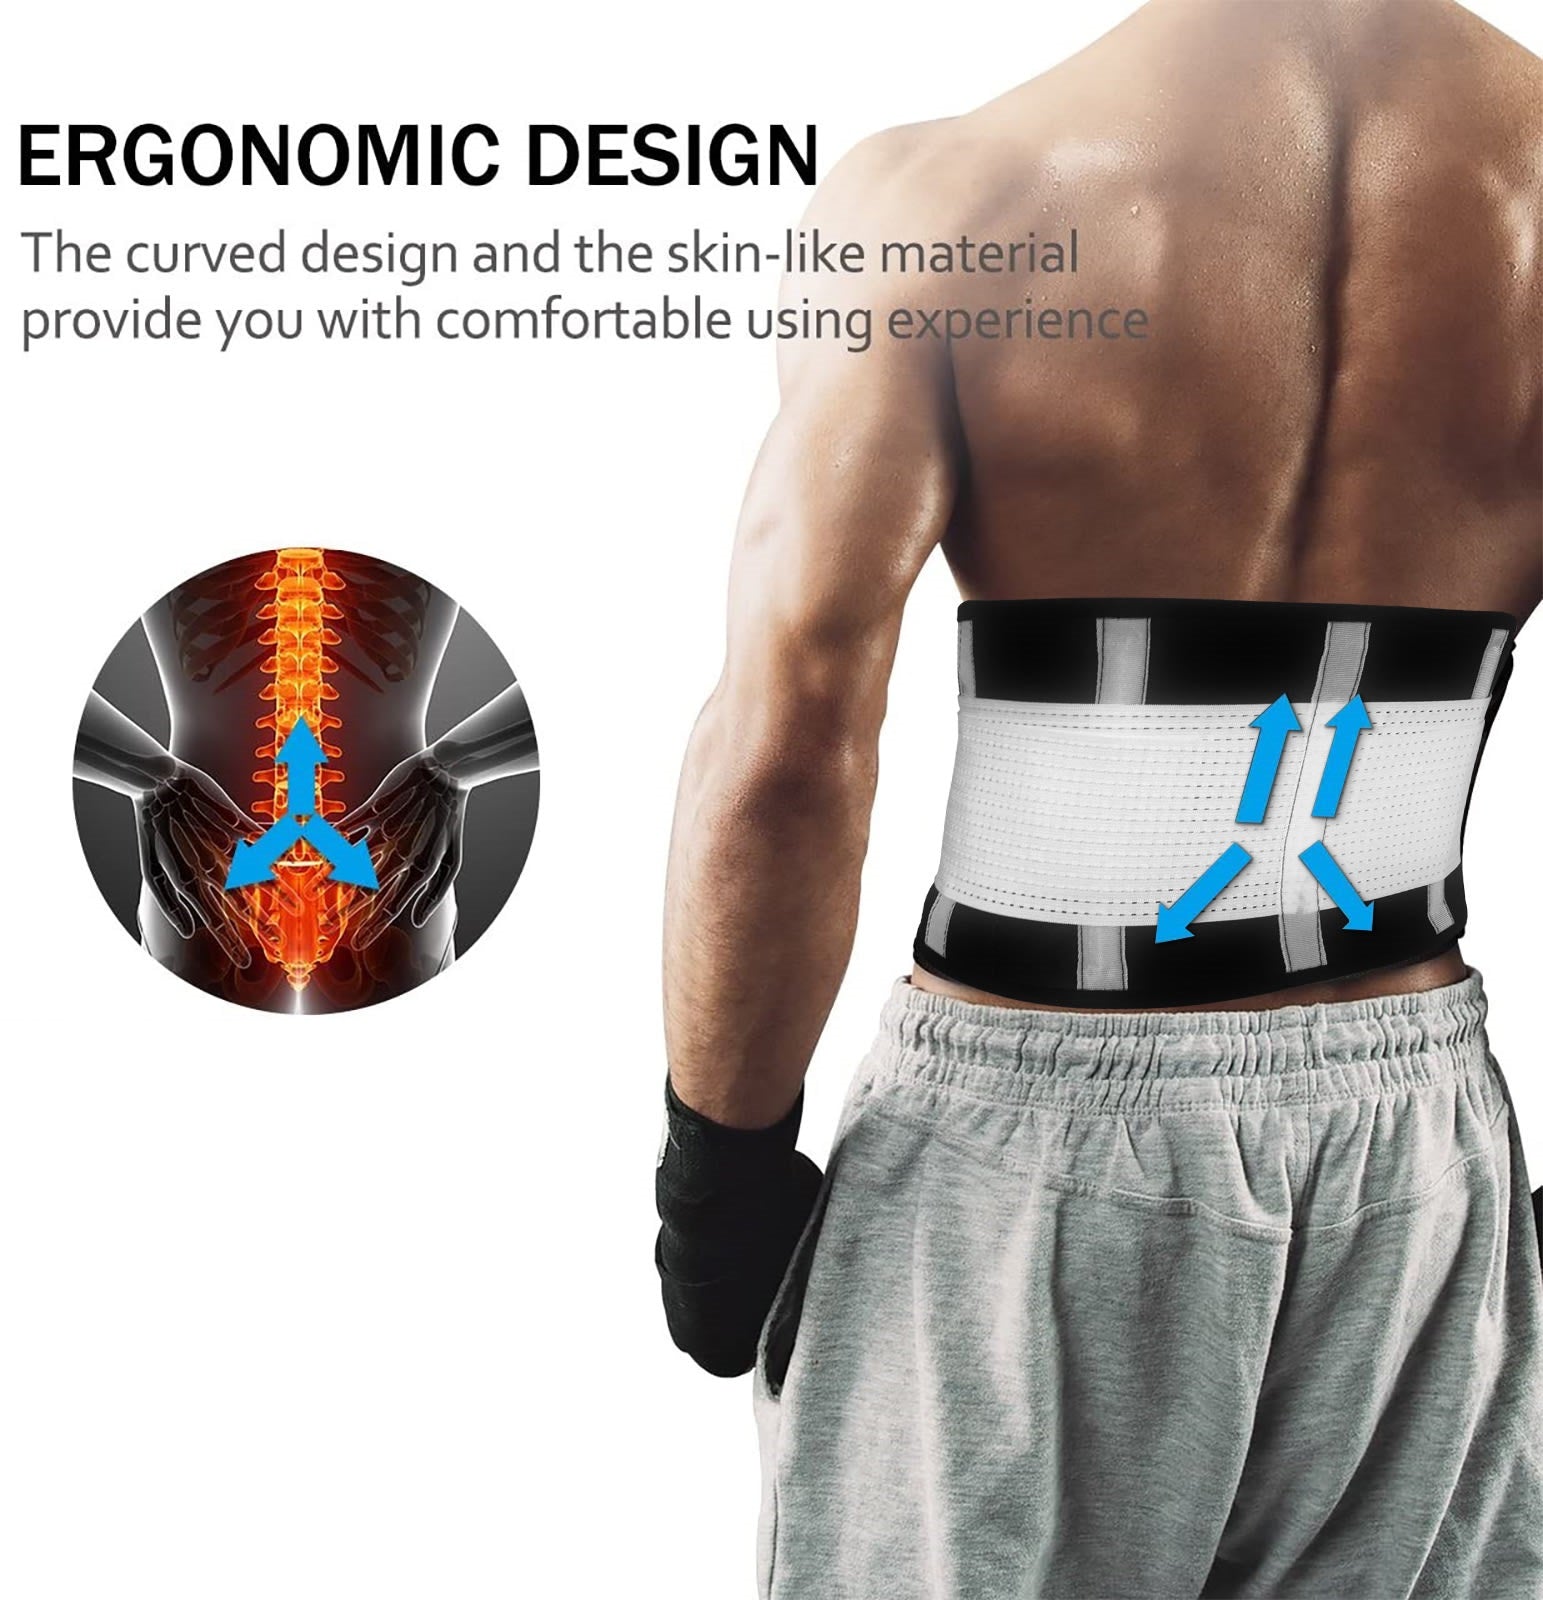 Lv. life USB Back Support Belt Waist Heating Pad Hot Cold Brace Pain Relief  Muscle Lumbar Kit Waist Care,Waist Support,Heating Belt 